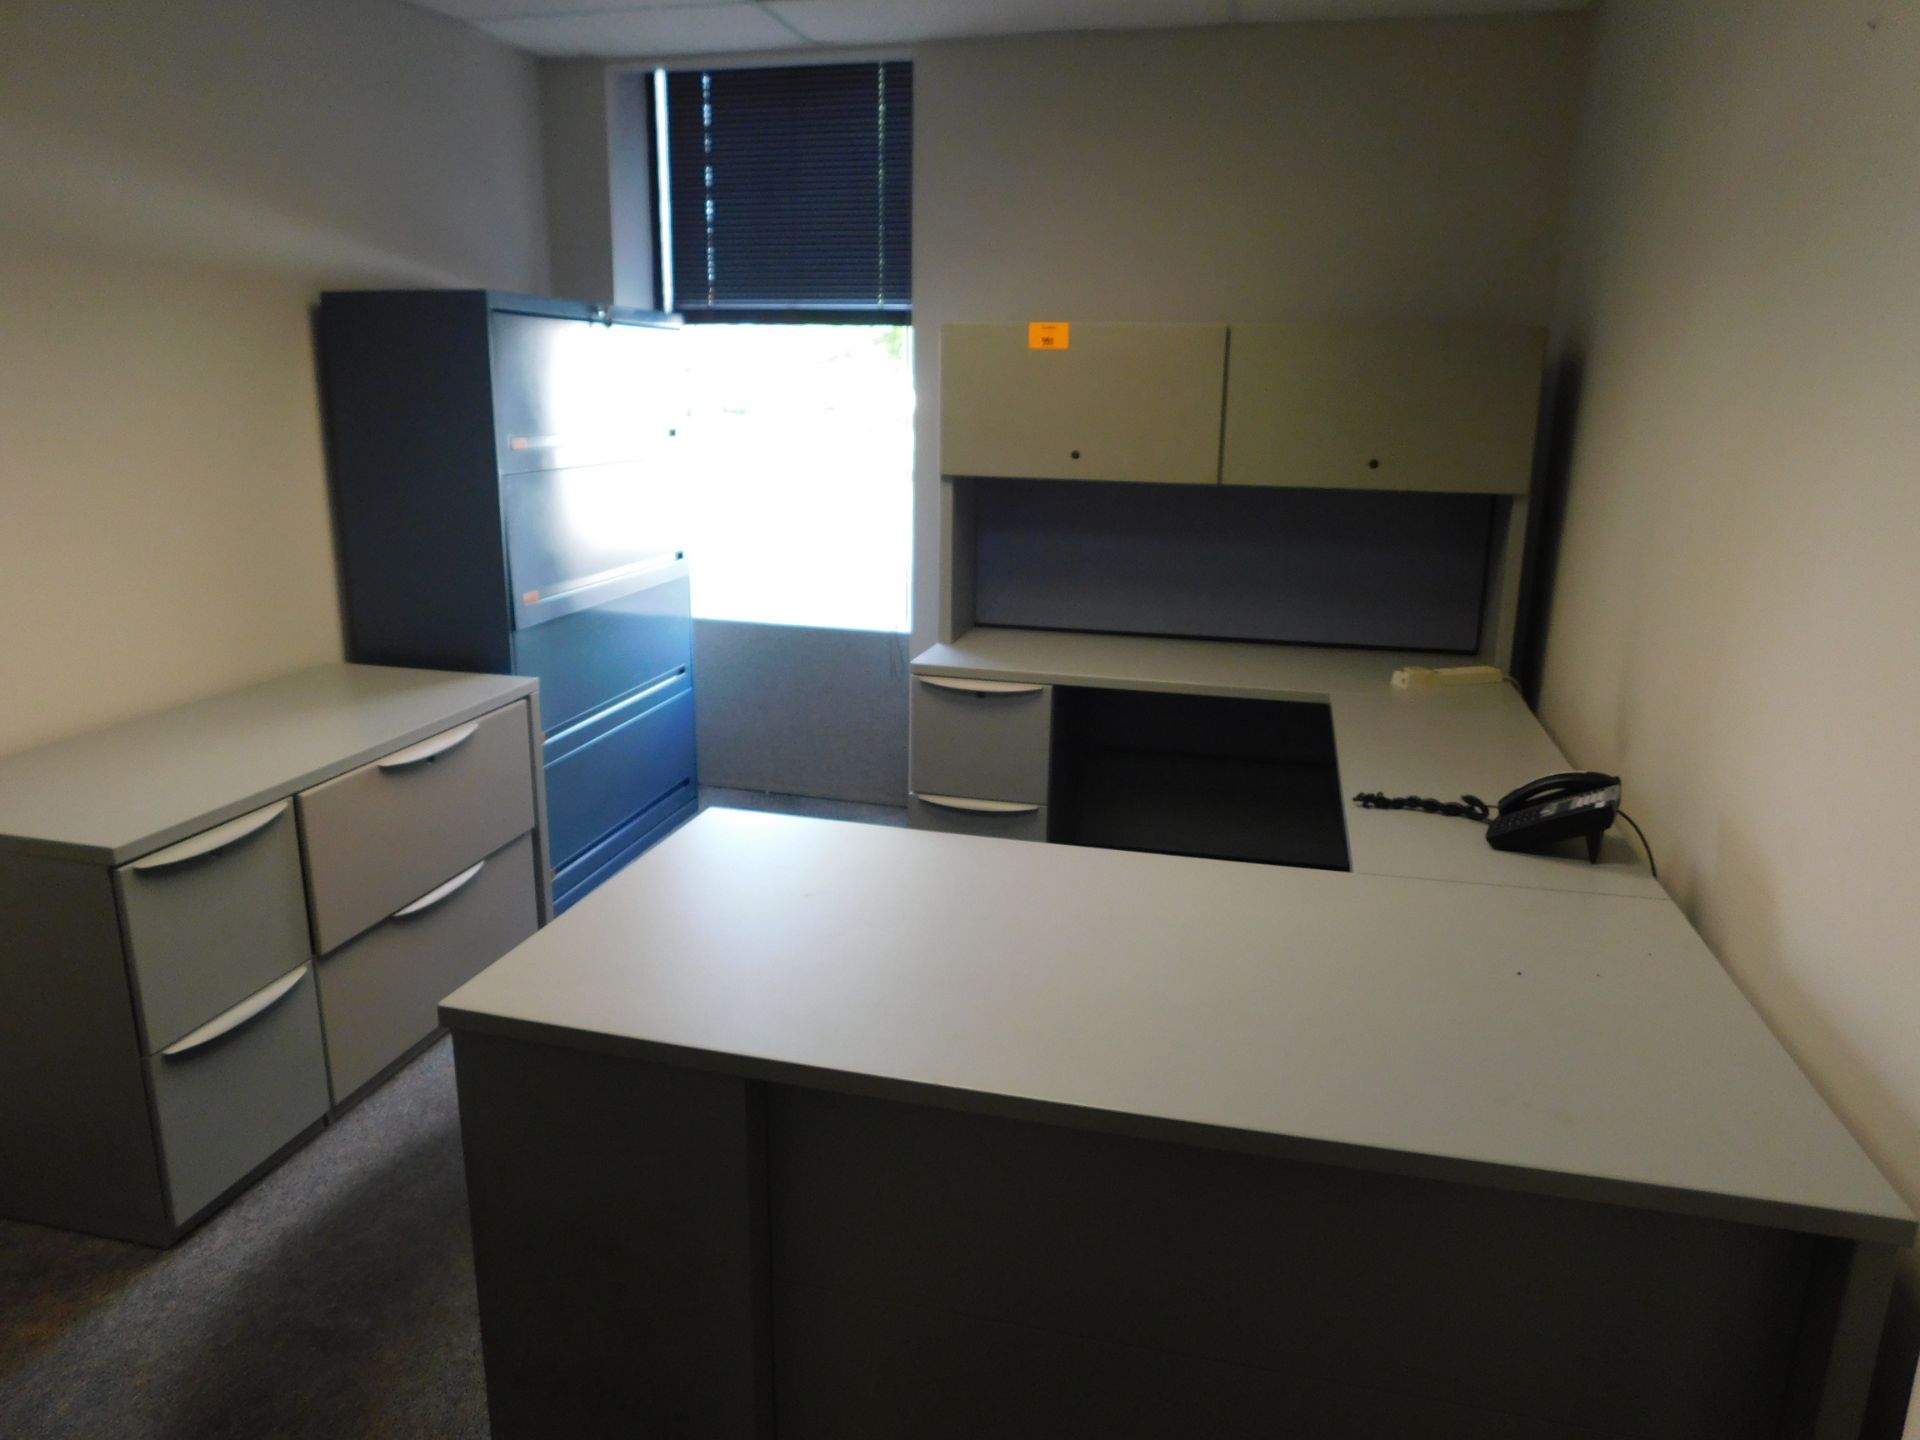 Office Furniture - Image 3 of 4